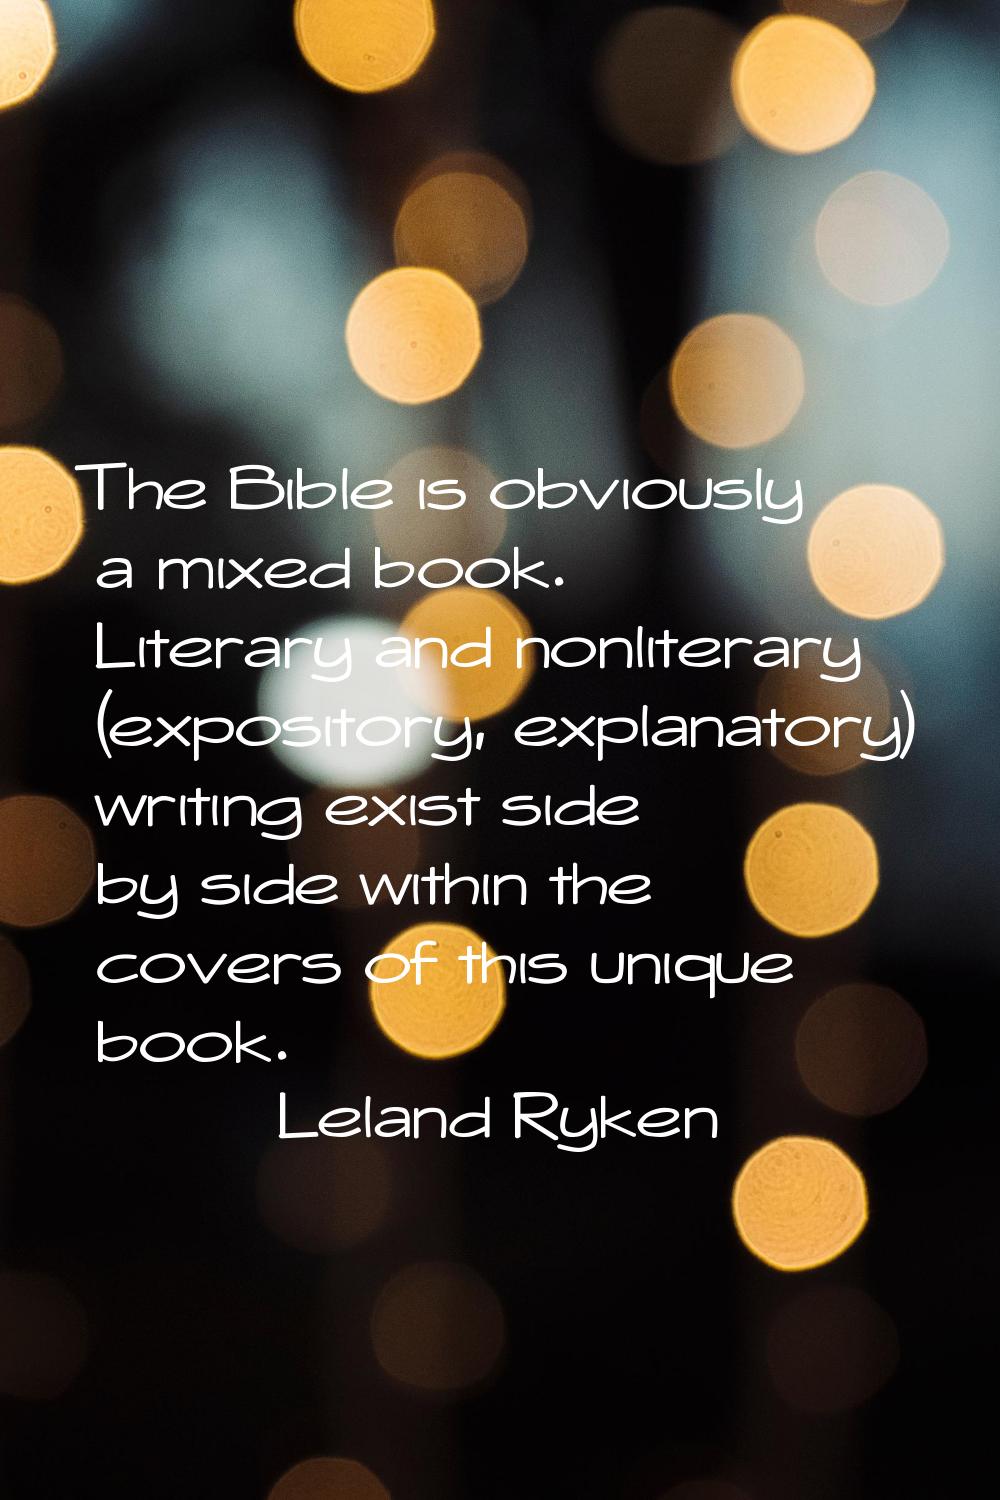 The Bible is obviously a mixed book. Literary and nonliterary (expository, explanatory) writing exi